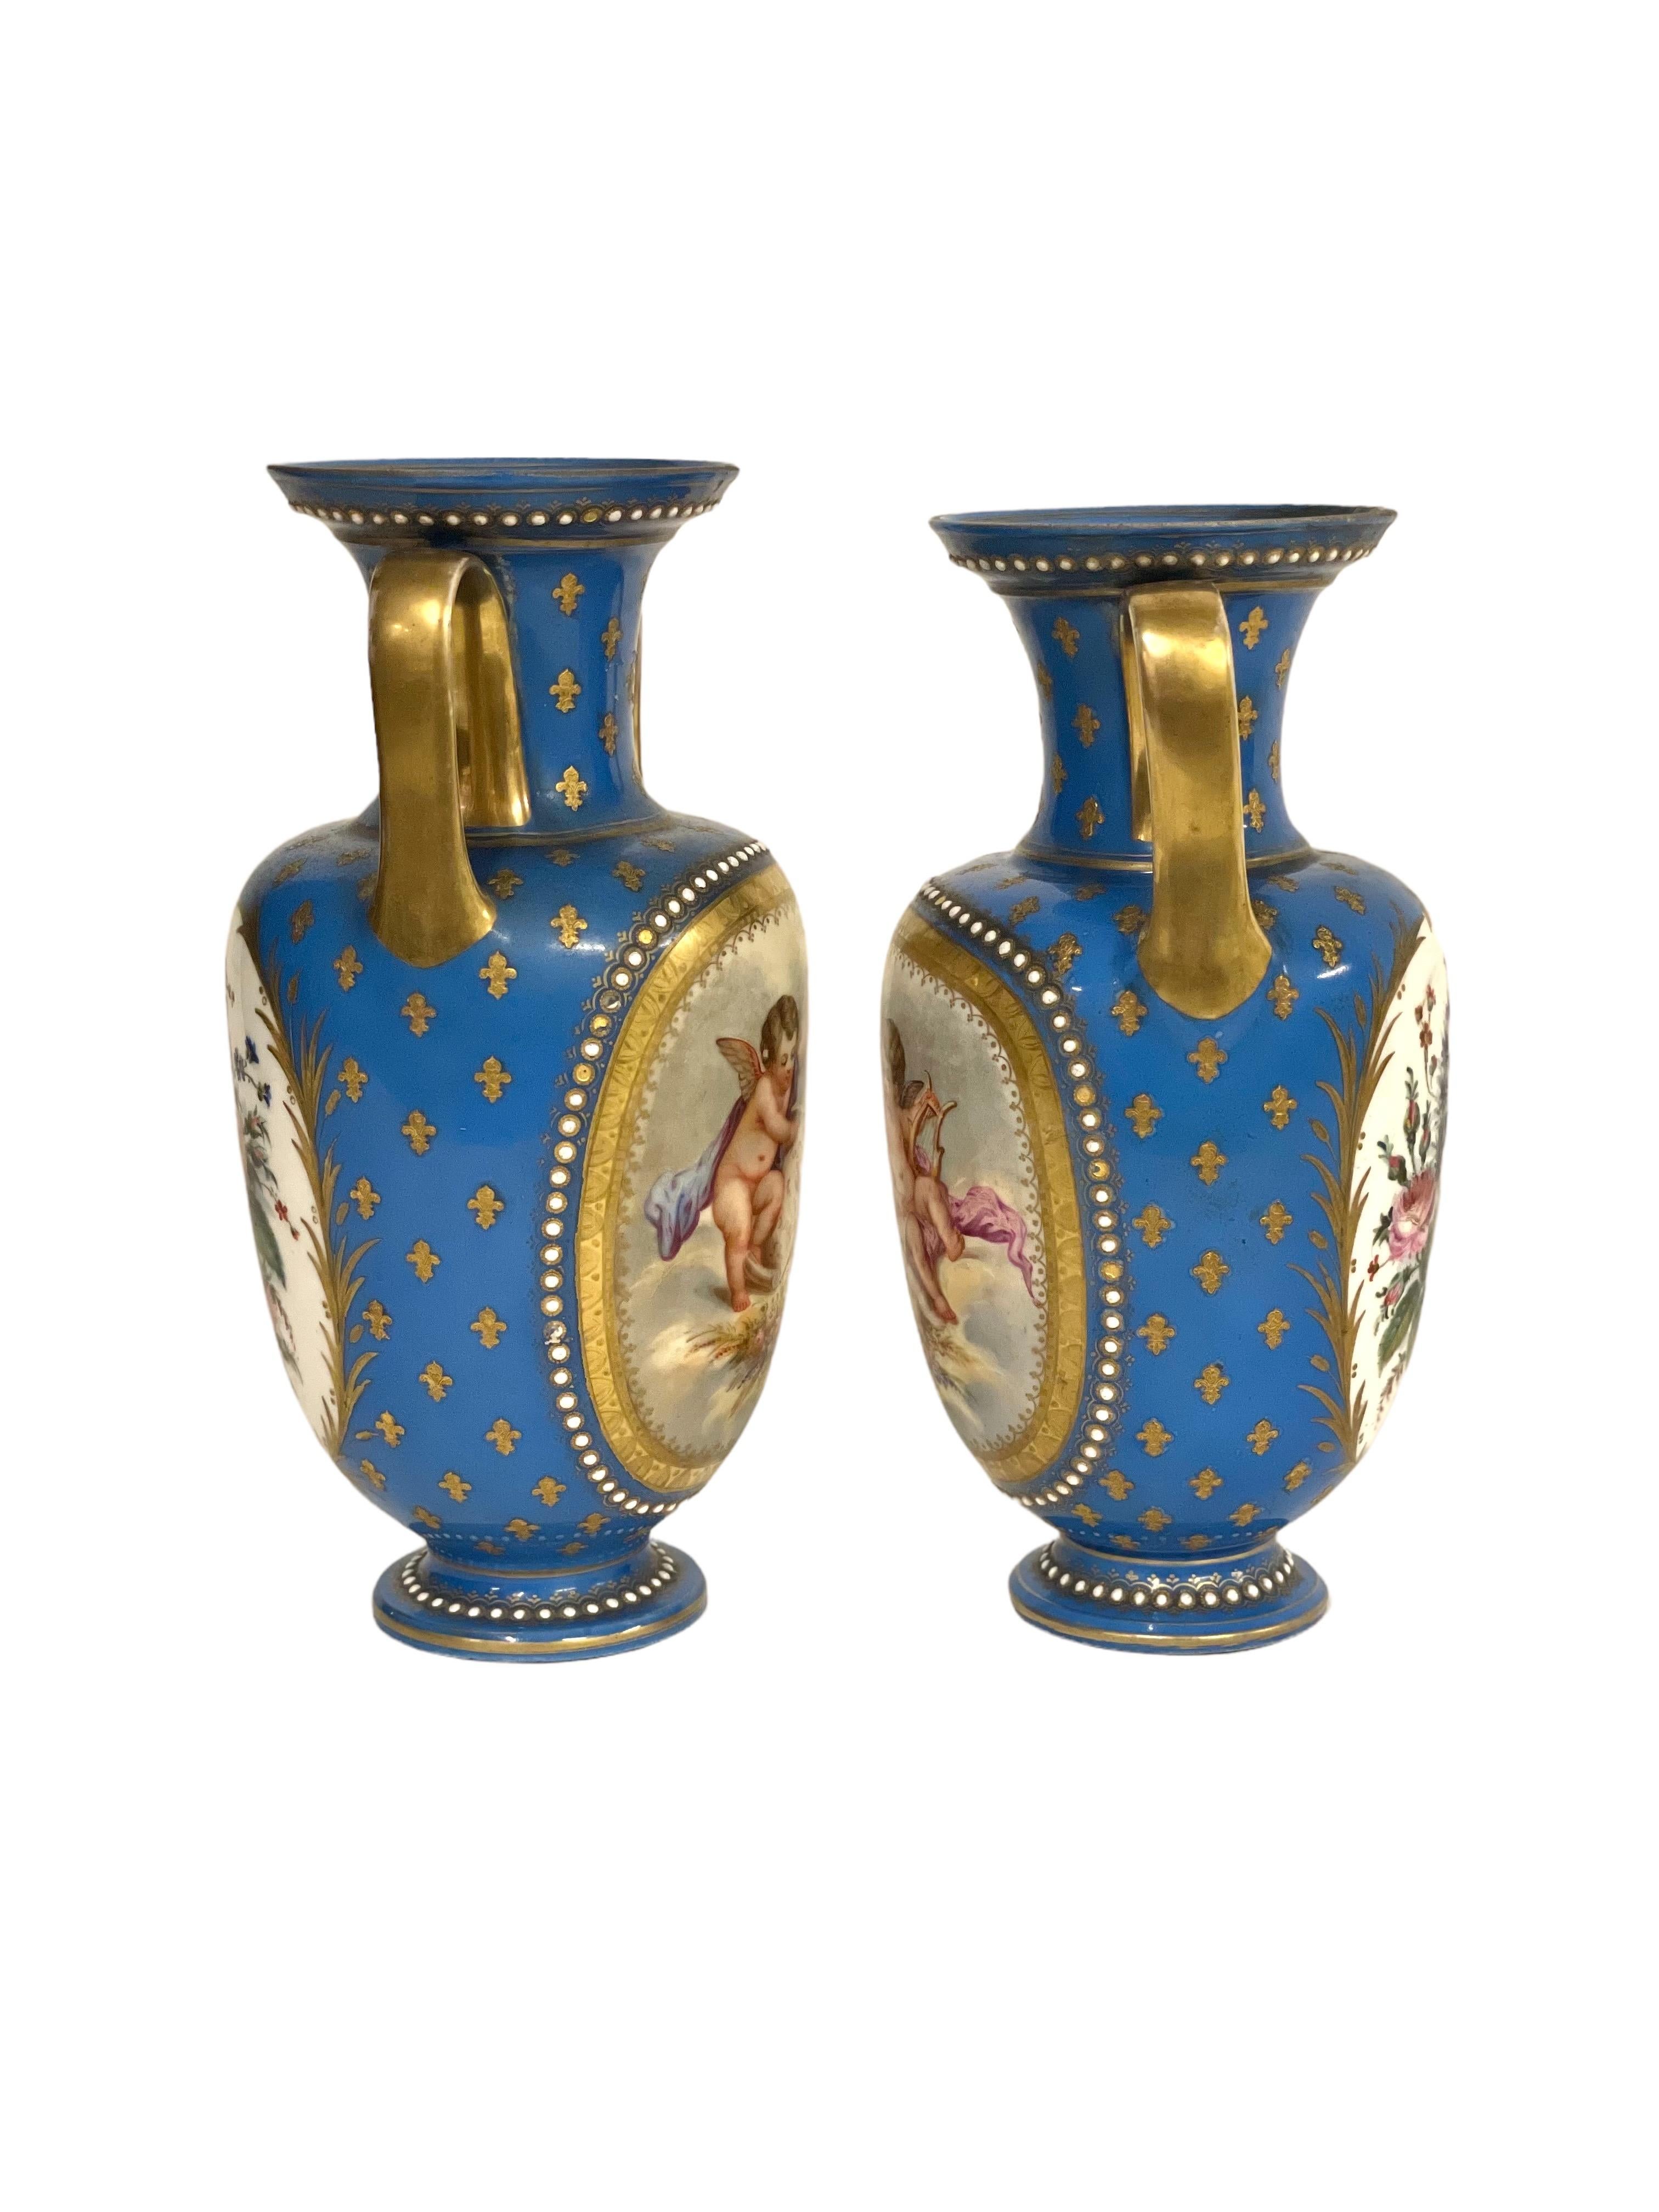 French Sèvres Pair of Gilded and Blue Porcelain Vases, 19th Century For Sale